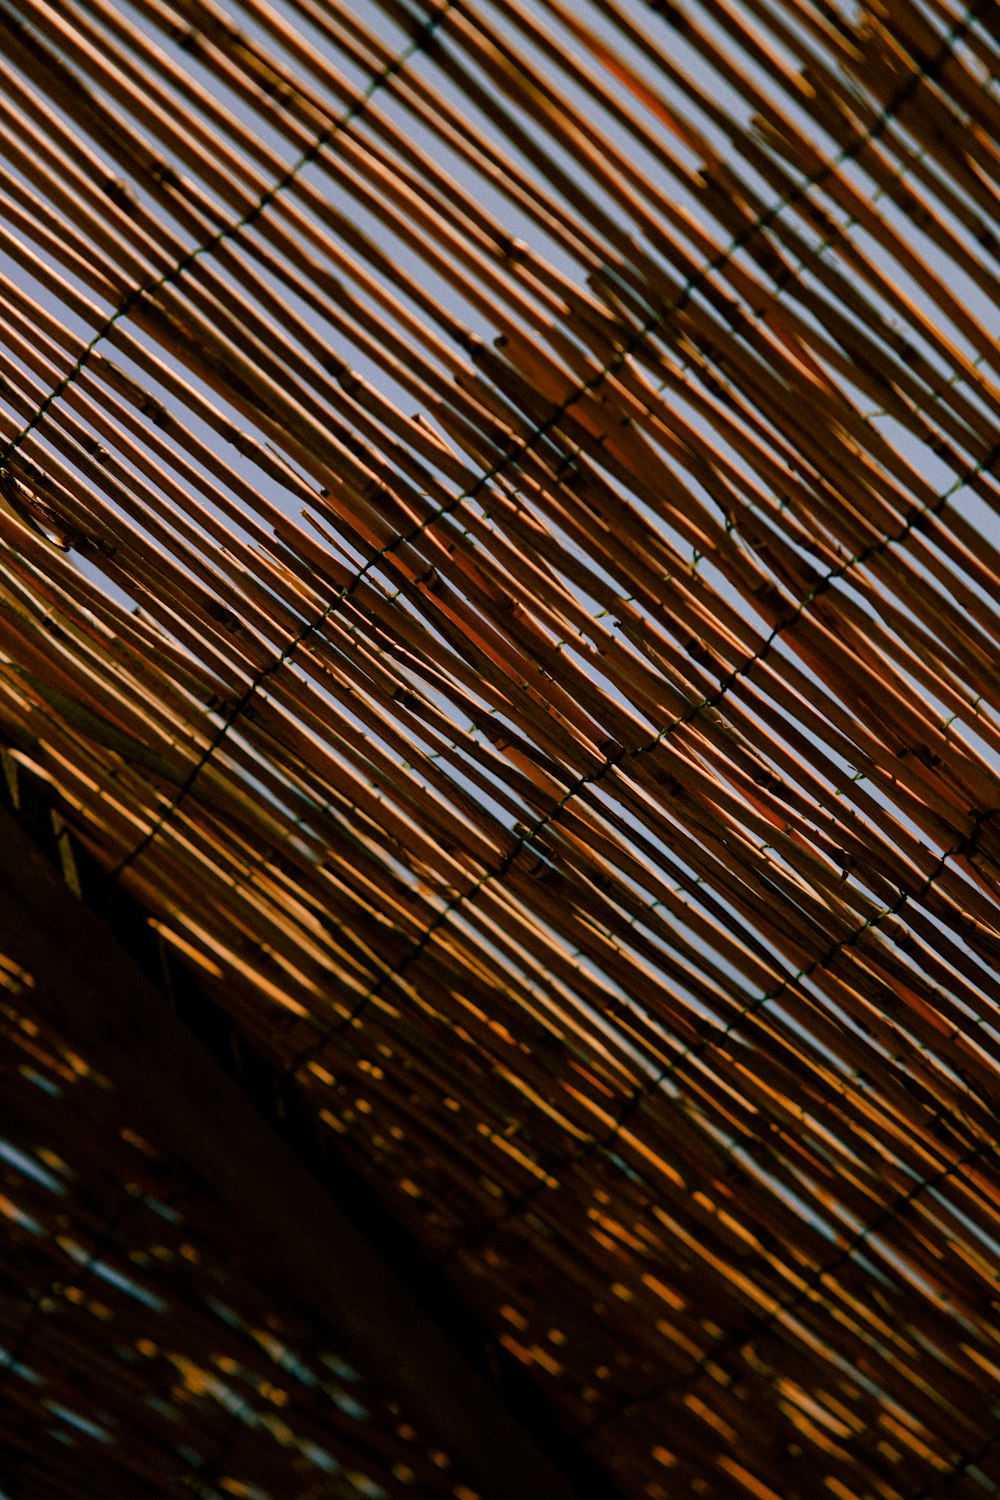 a close up of a metal surface